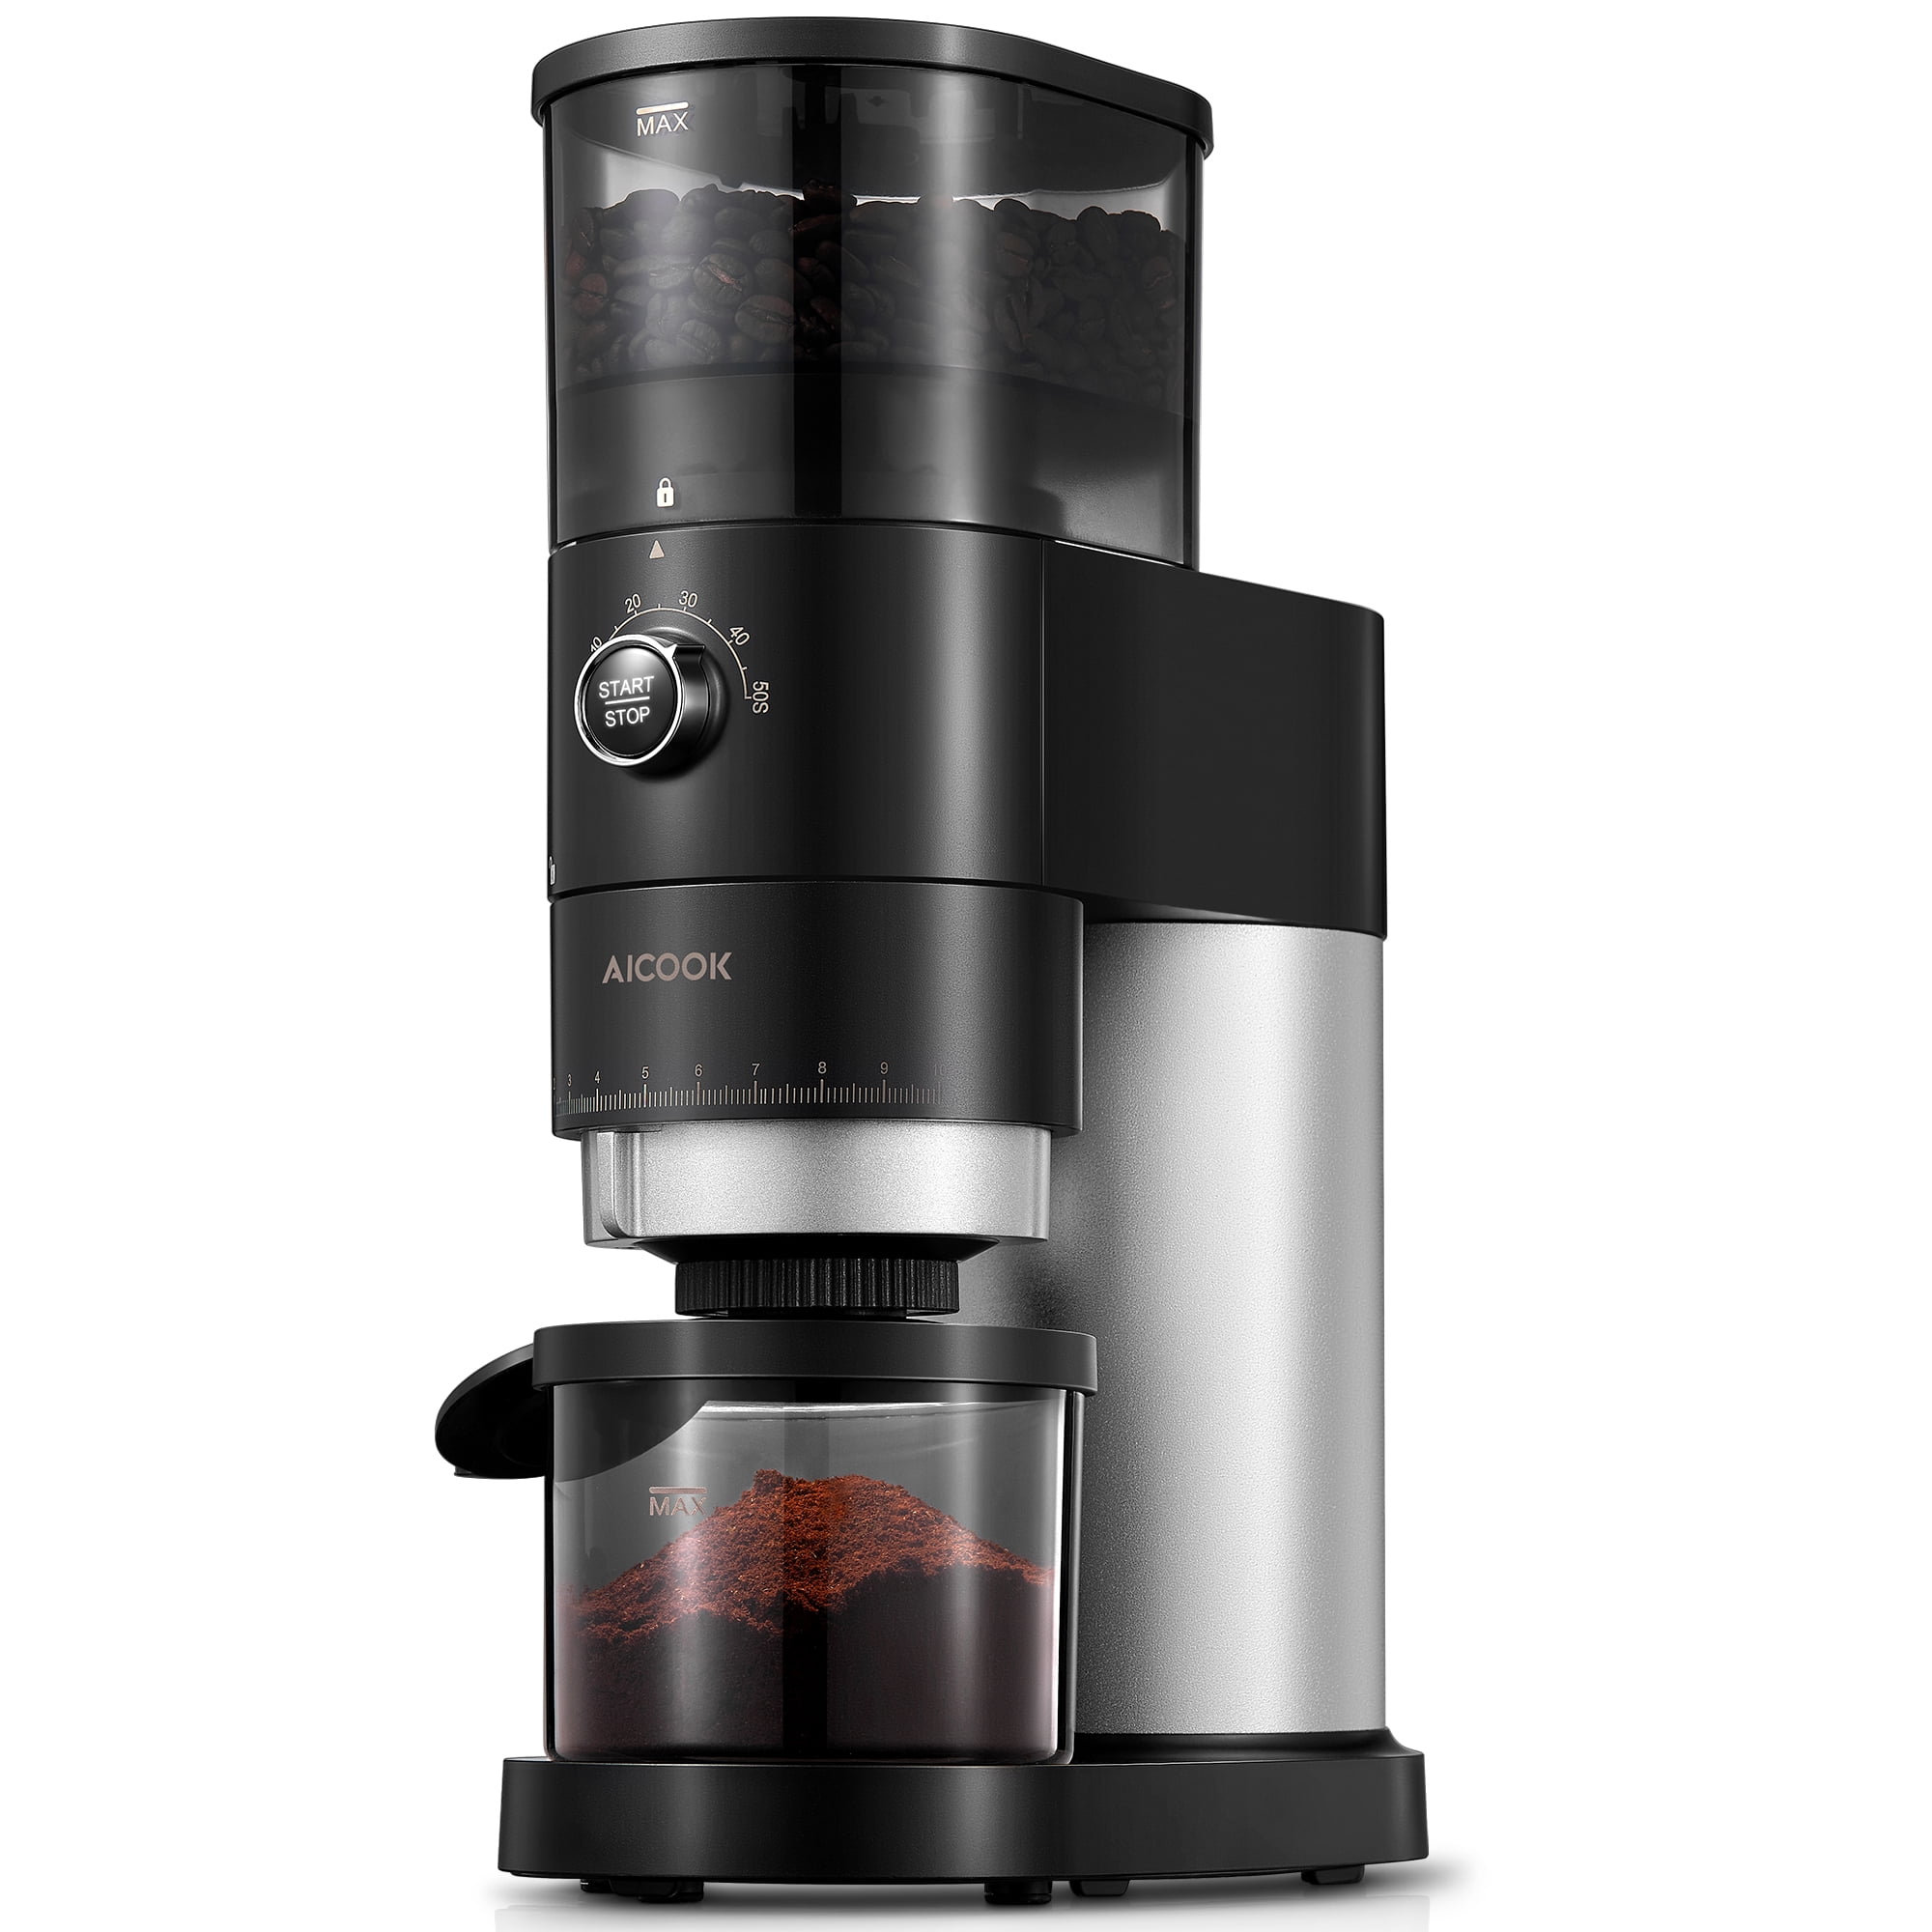  ACKZOT Coffee Grinder, Anti-Static Conical Burr Coffee